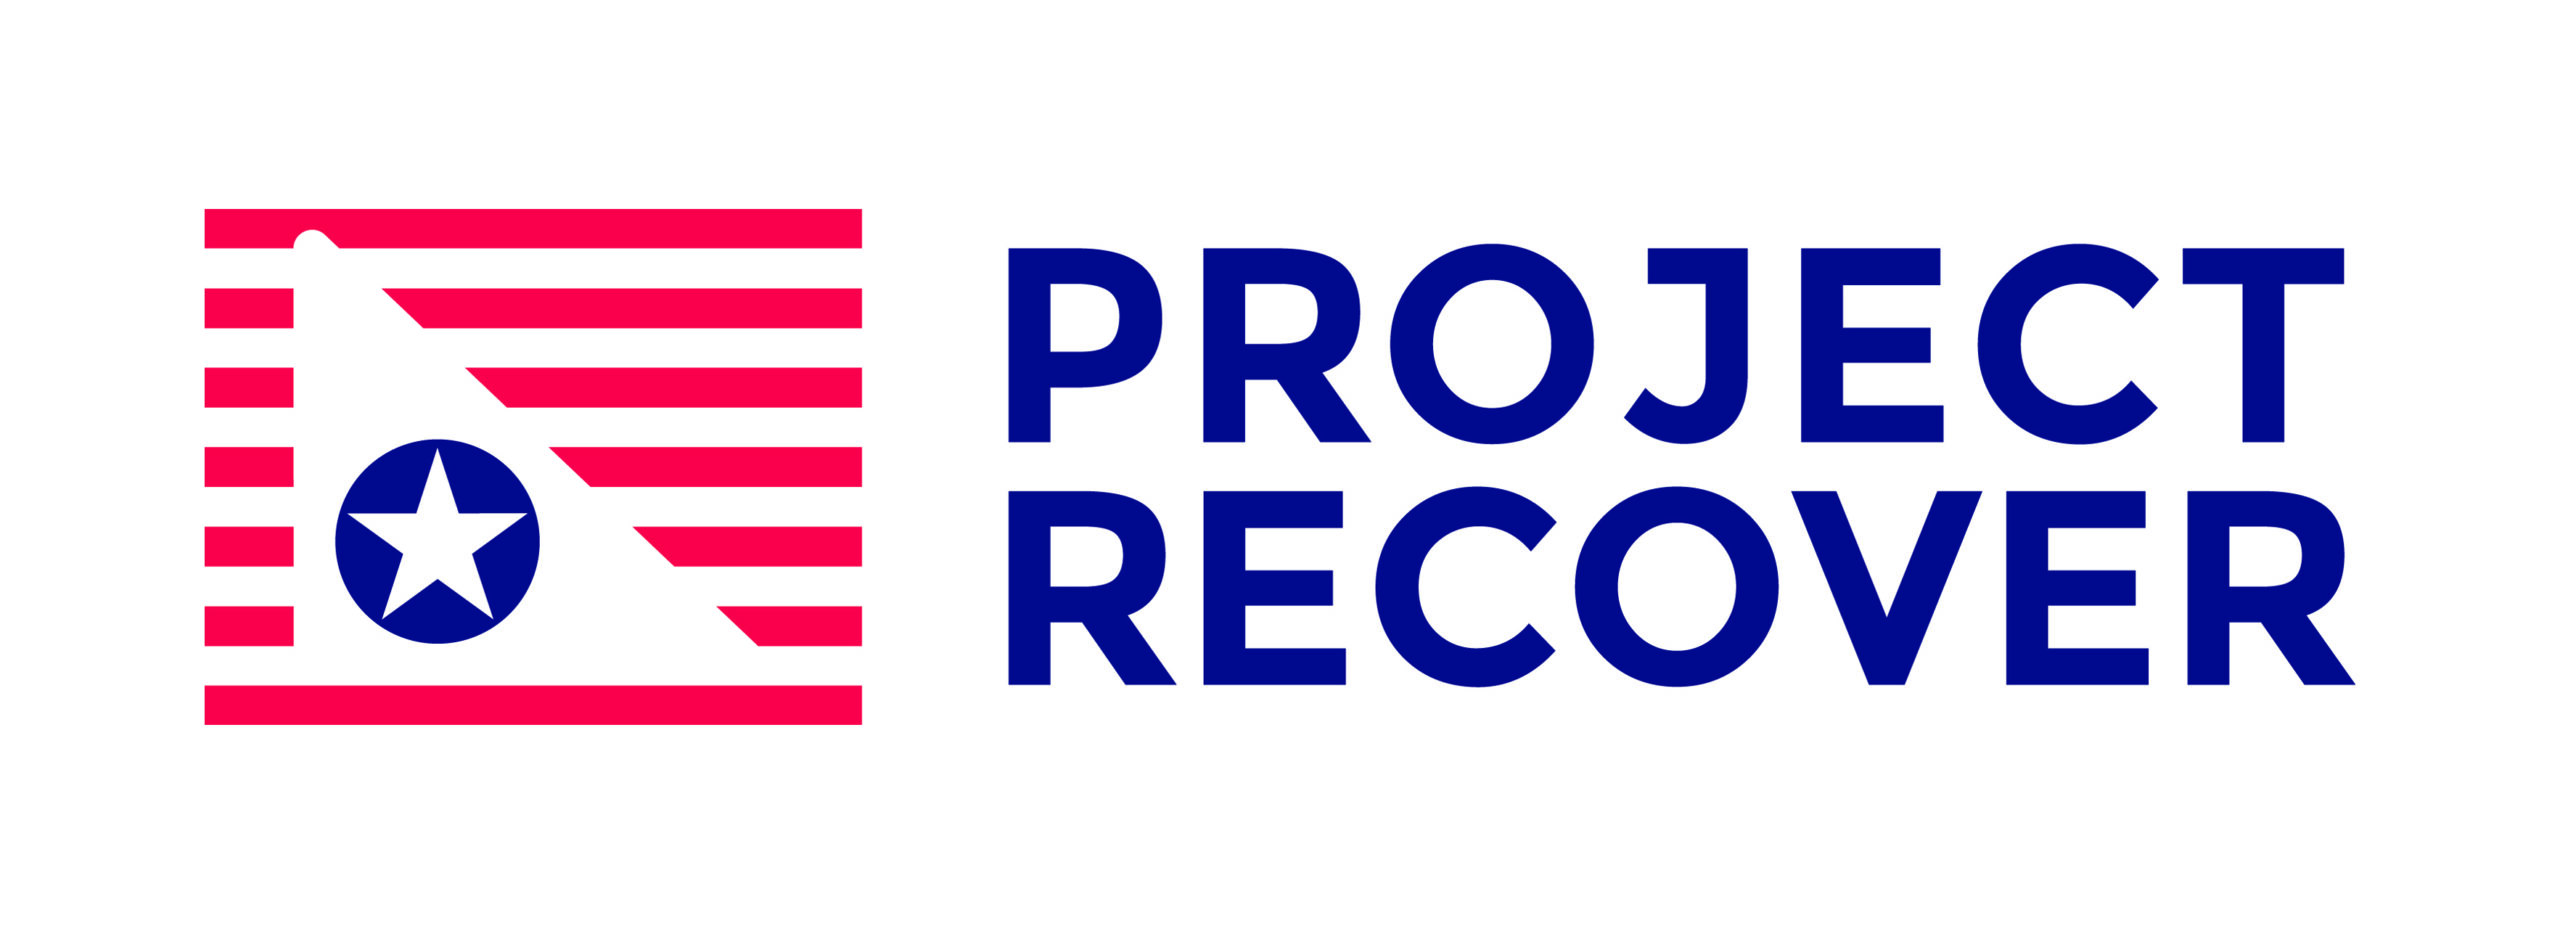 Project Recover Logo HORZ CMYK 3000